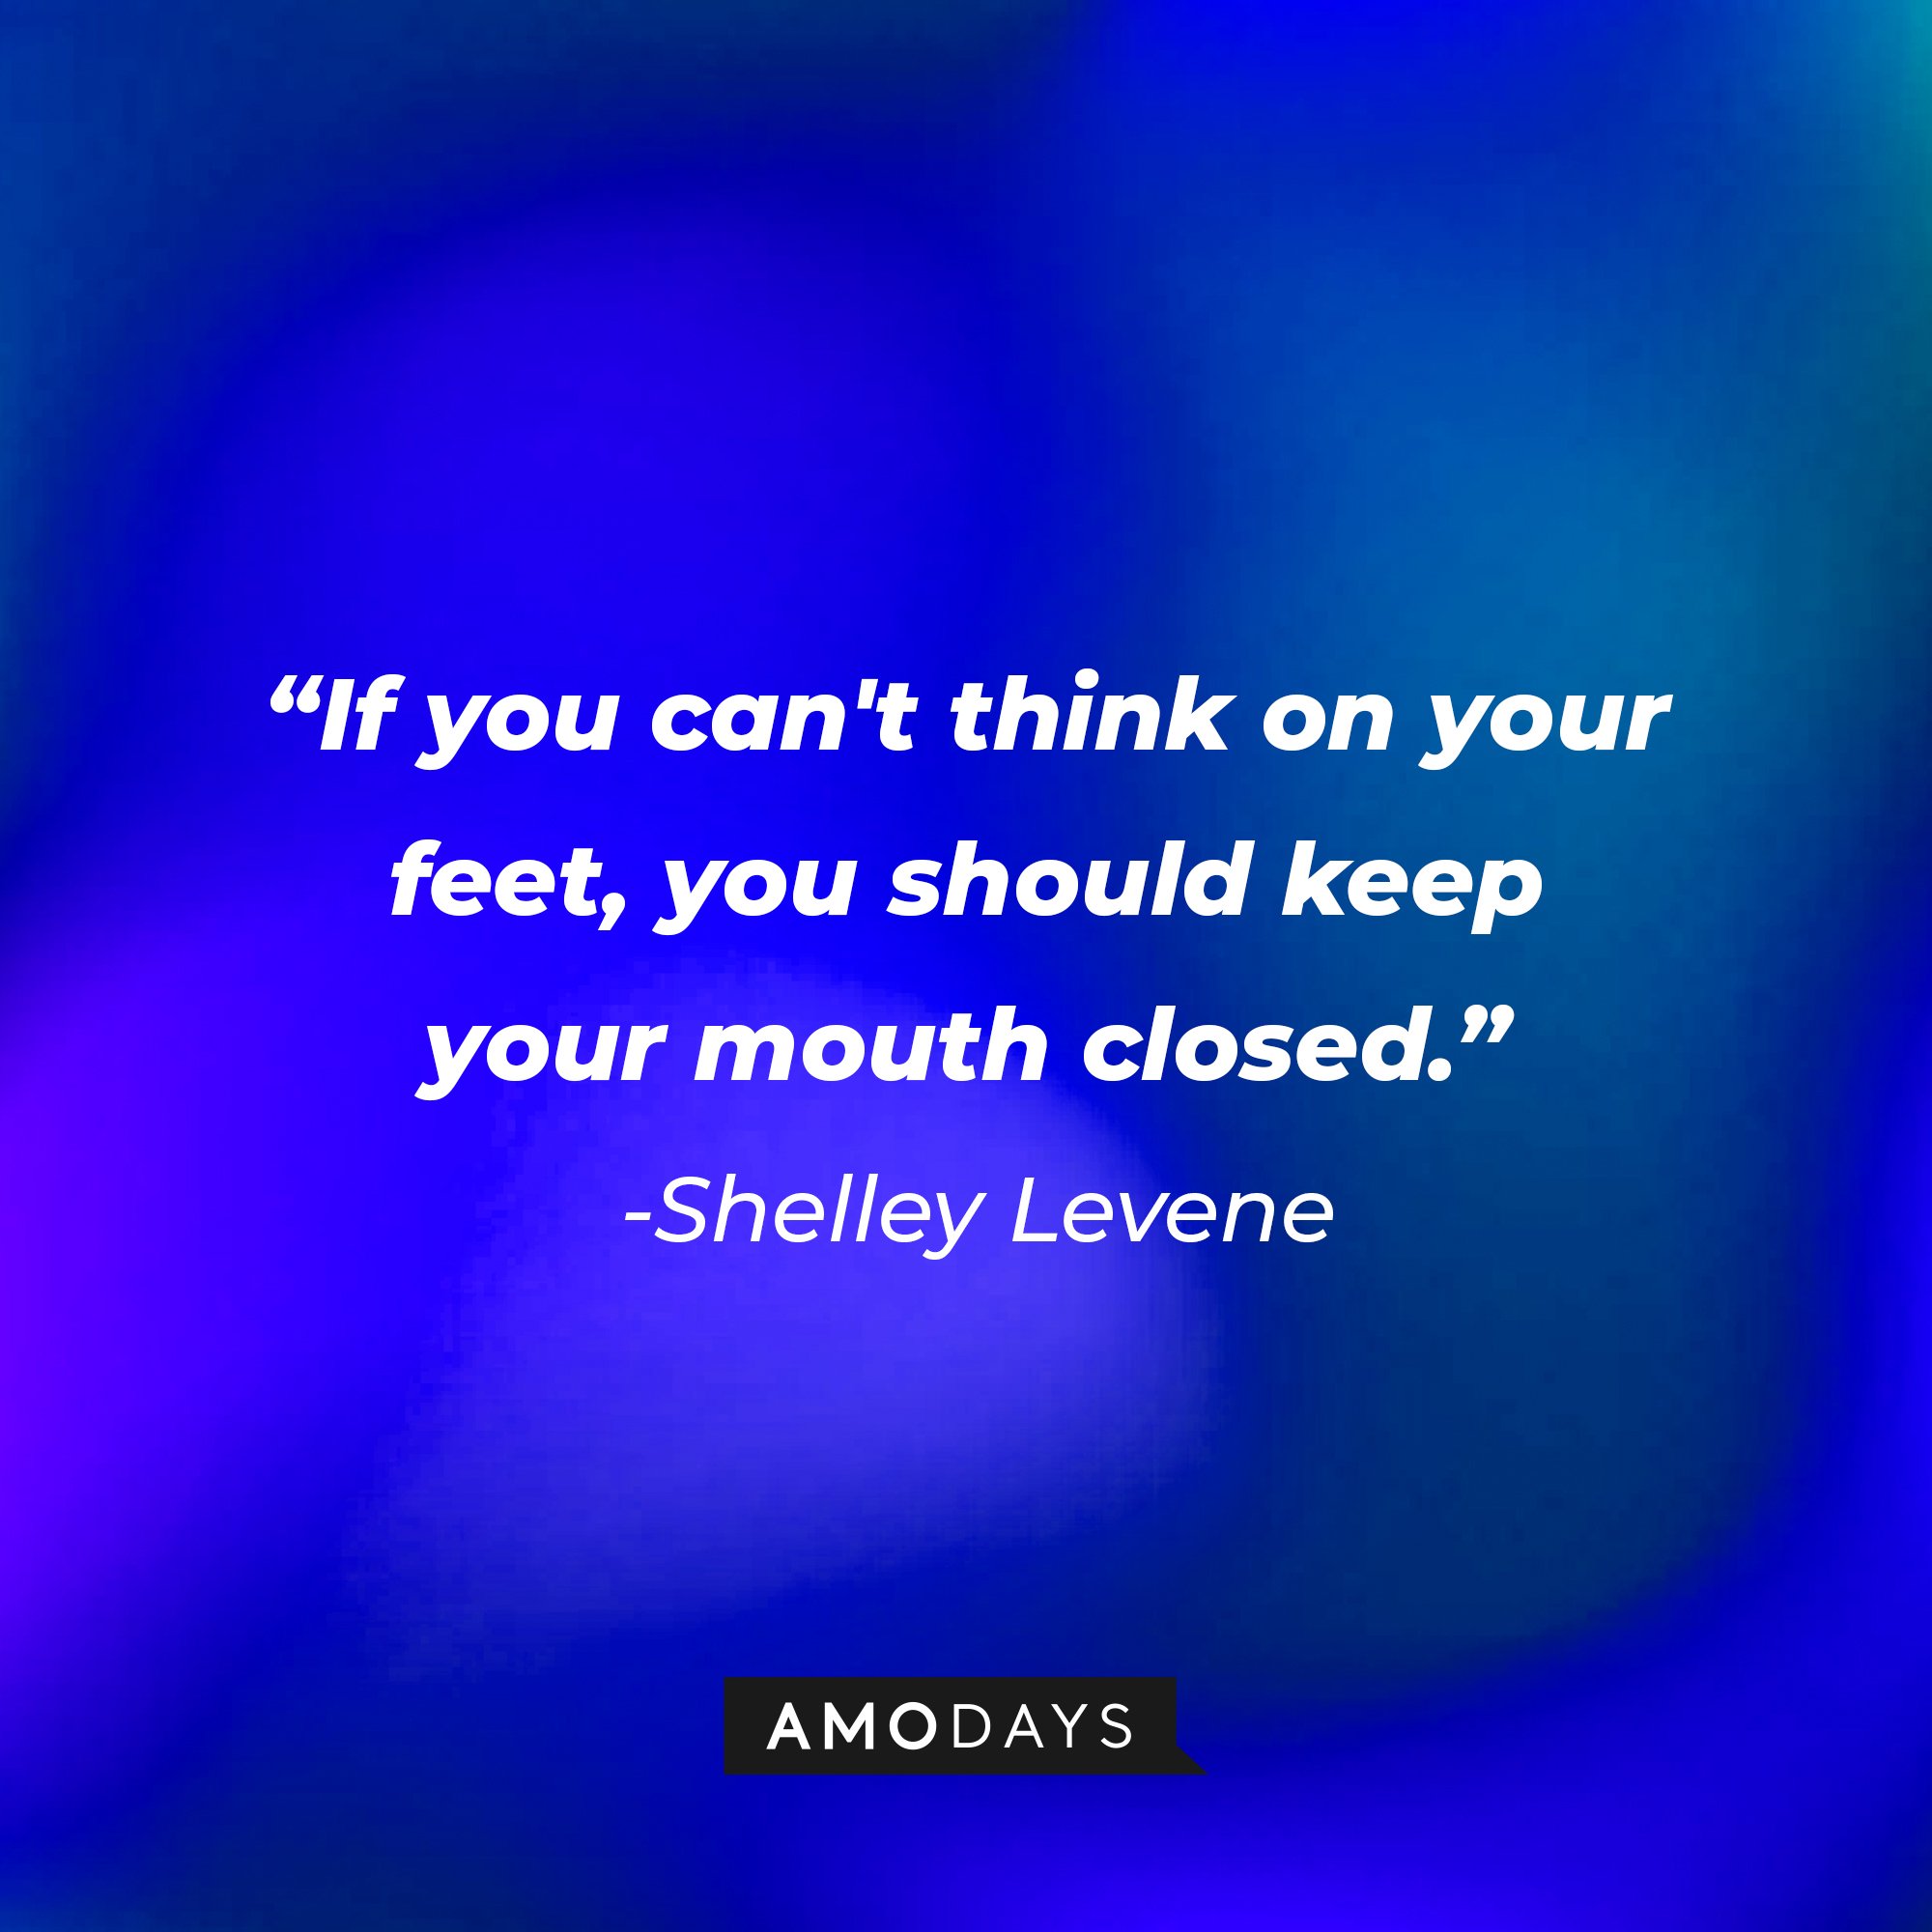 Shelley Levene's quote: "If you can't think on your feet, you should keep your mouth closed."  | Image: AmoDays